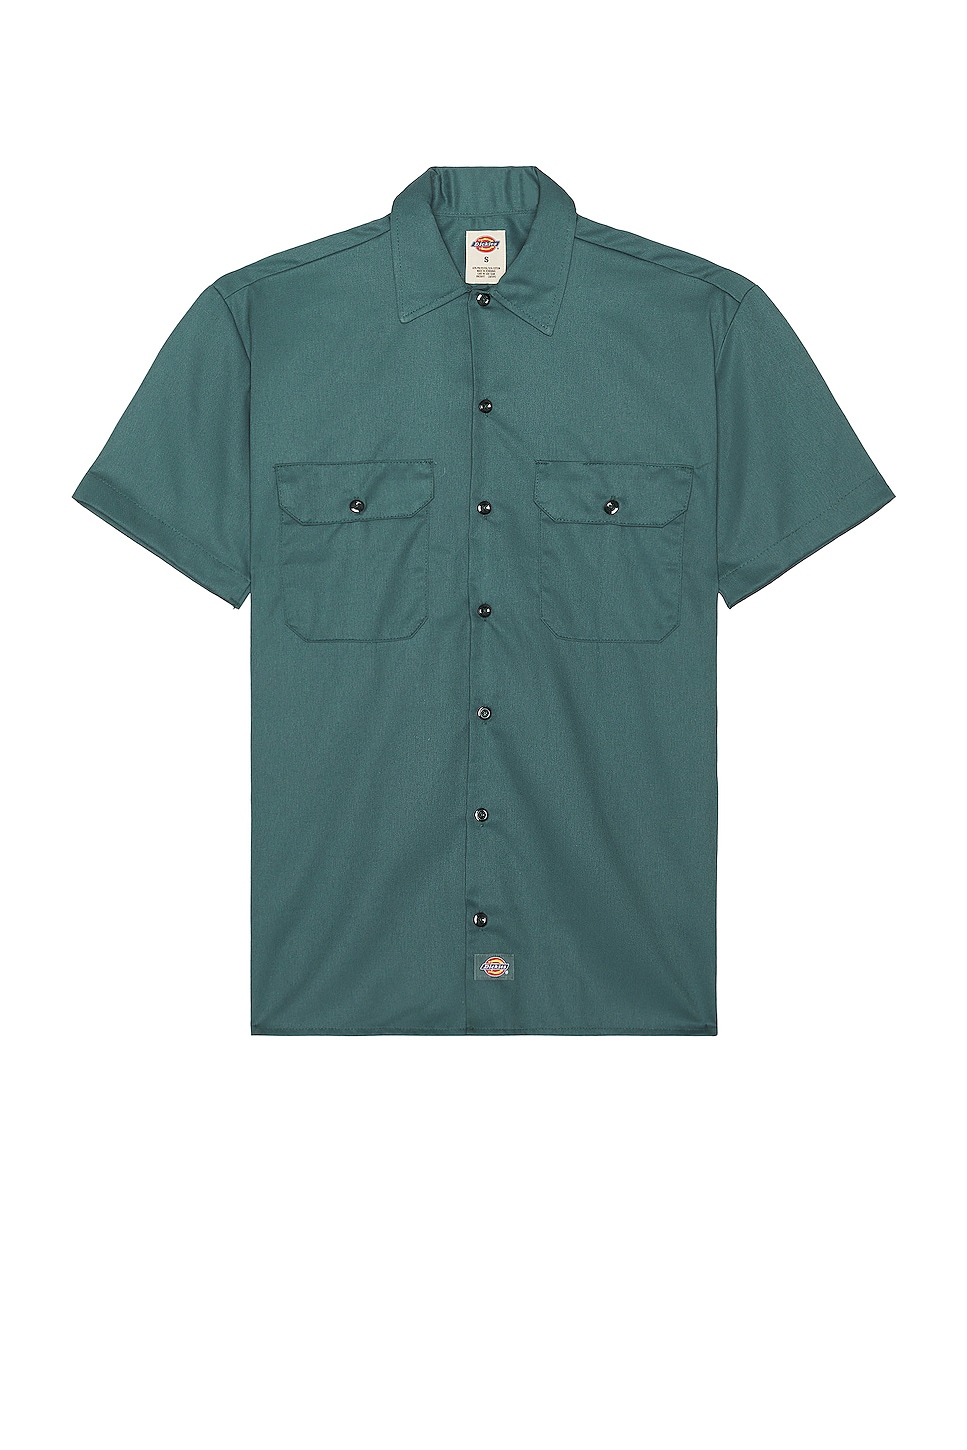 Image 1 of Dickies Original Twill Short Sleeve Work Shirt in Lincoln Green